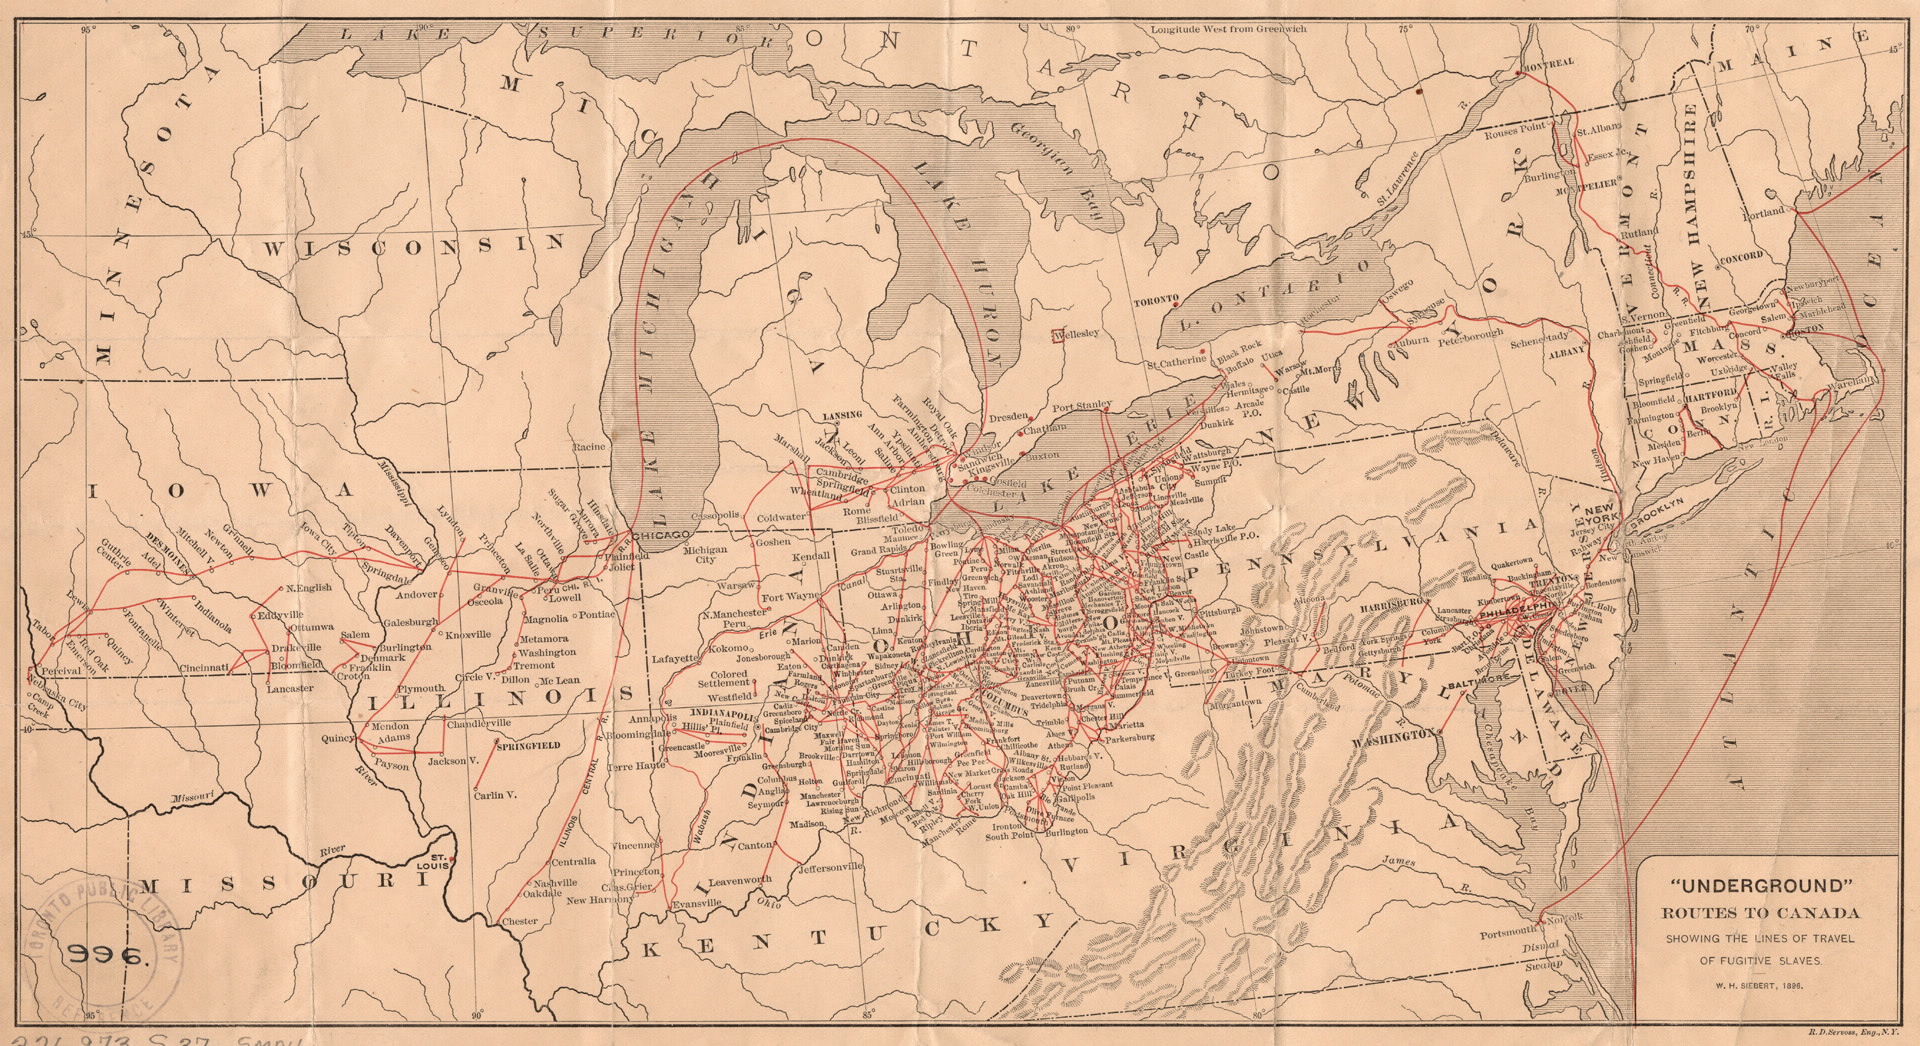 A map of the United States and Canada, showing routes of the Underground Railroad.